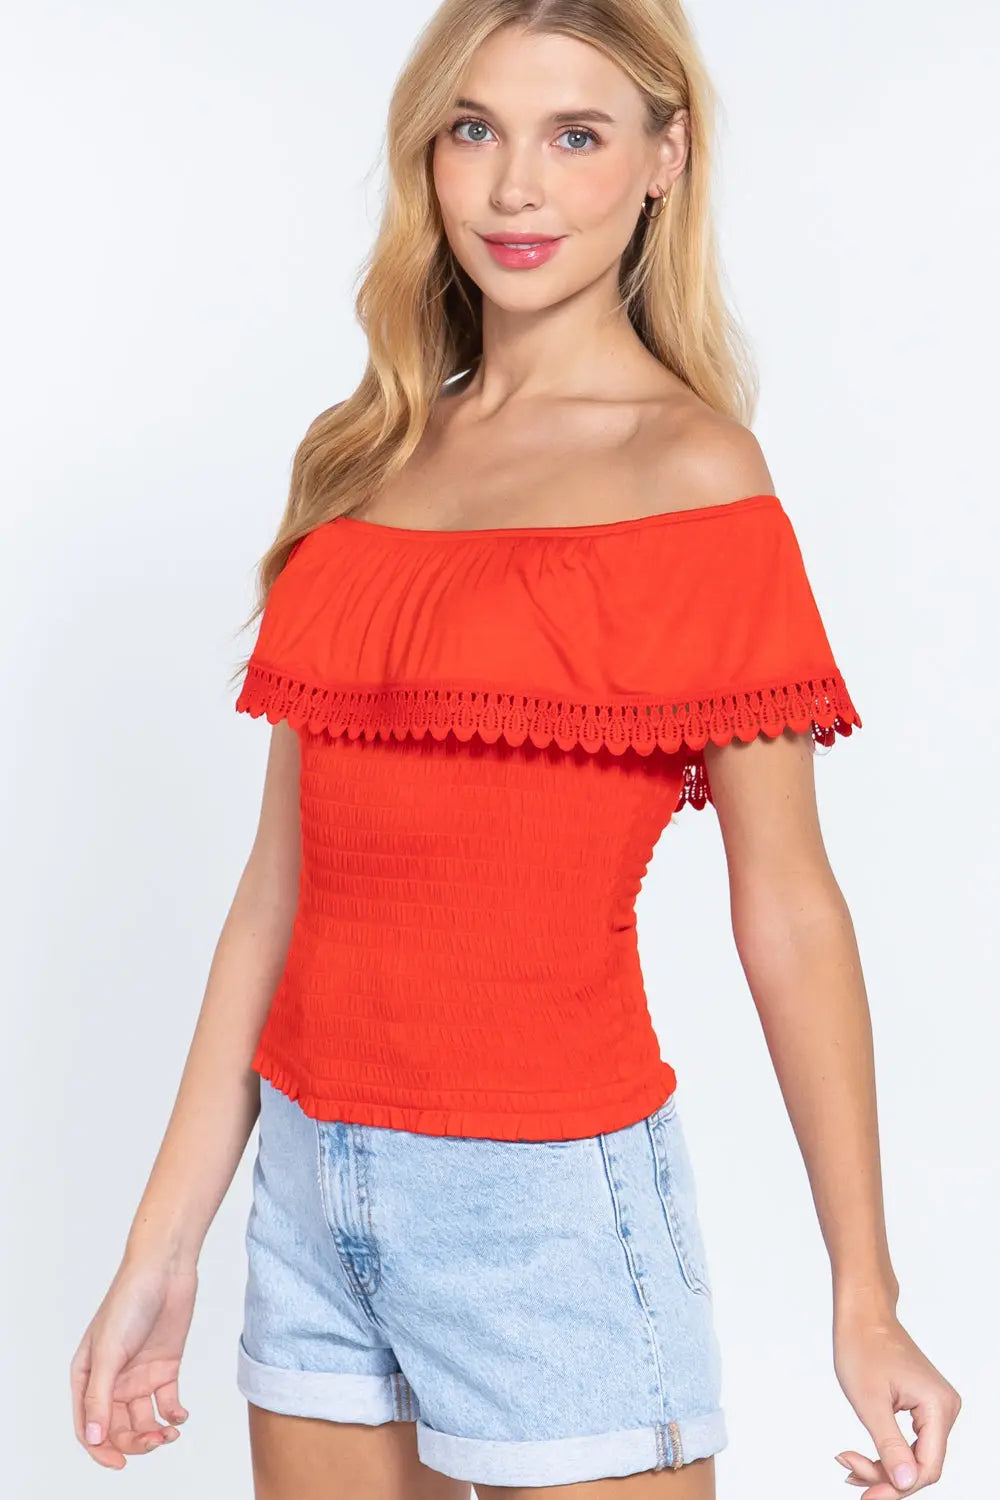 Off Shoulder W/lace Smocked Top Sunny EvE Fashion